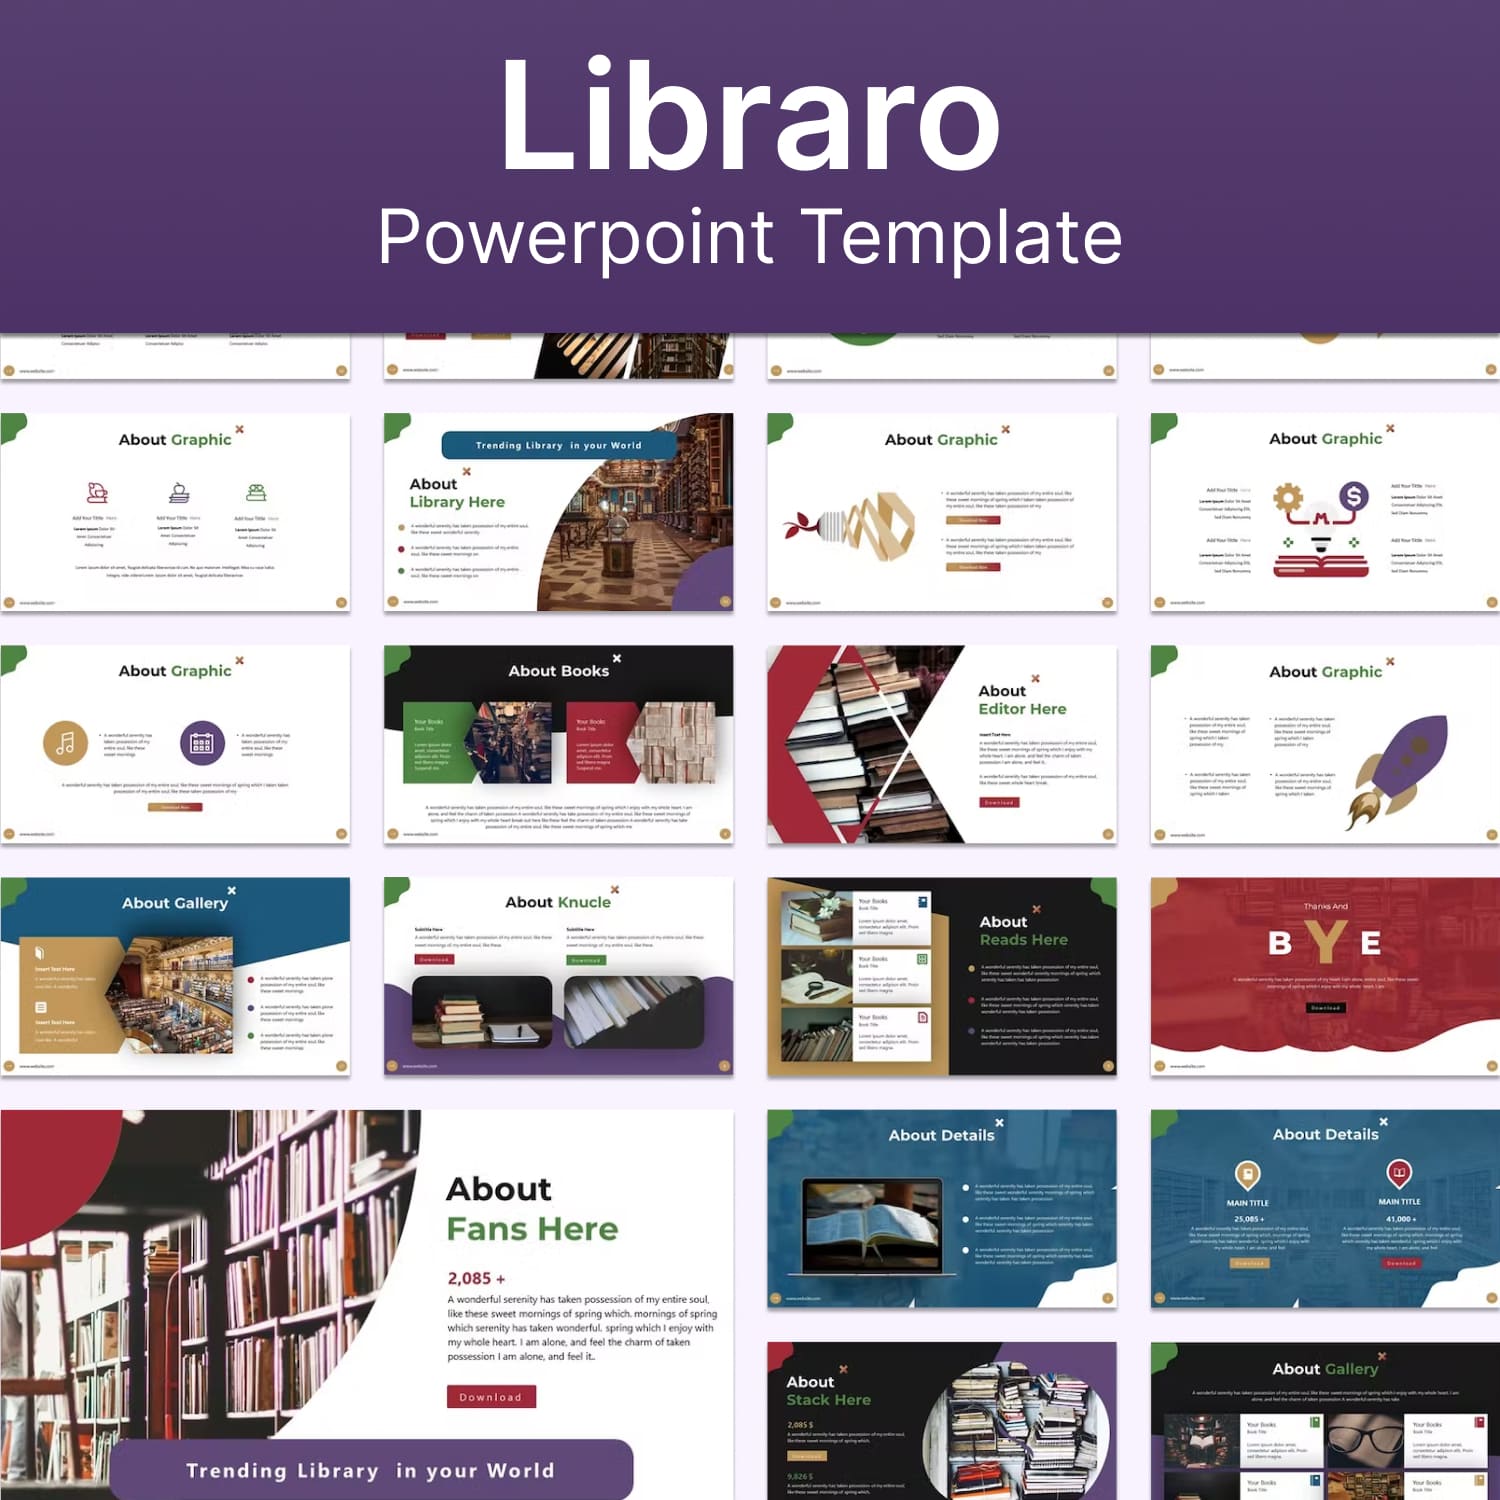 Libraro powerpoint template2 - main image preview.